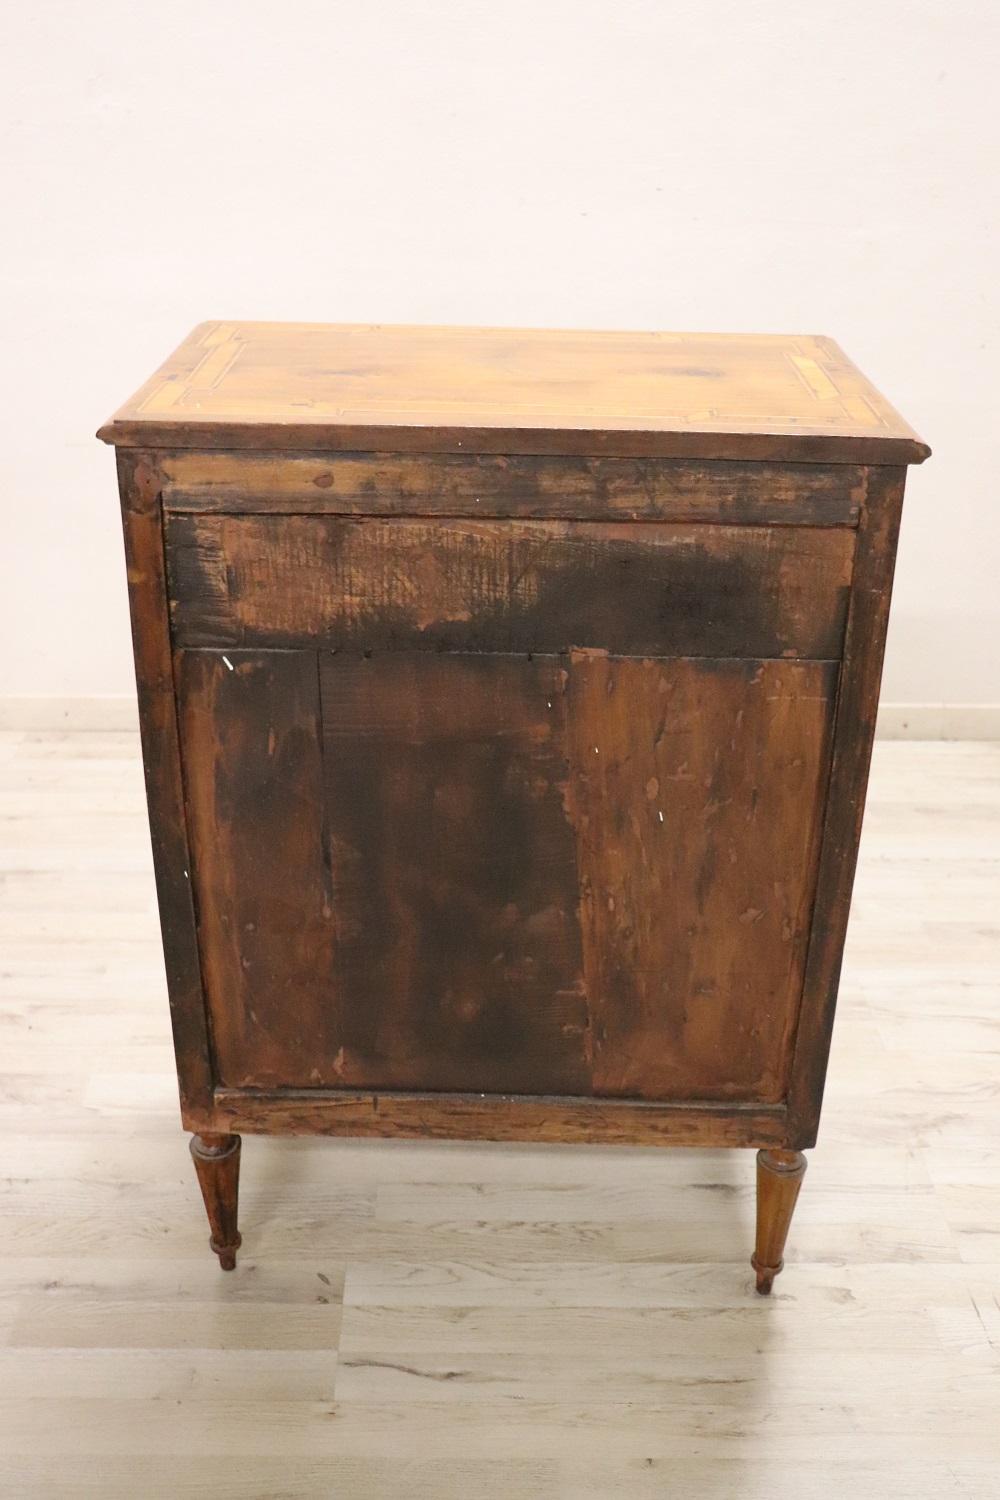 Early 19th Century Italian Louis XVI Style Inlaid Walnut Small Chest of Drawers For Sale 7